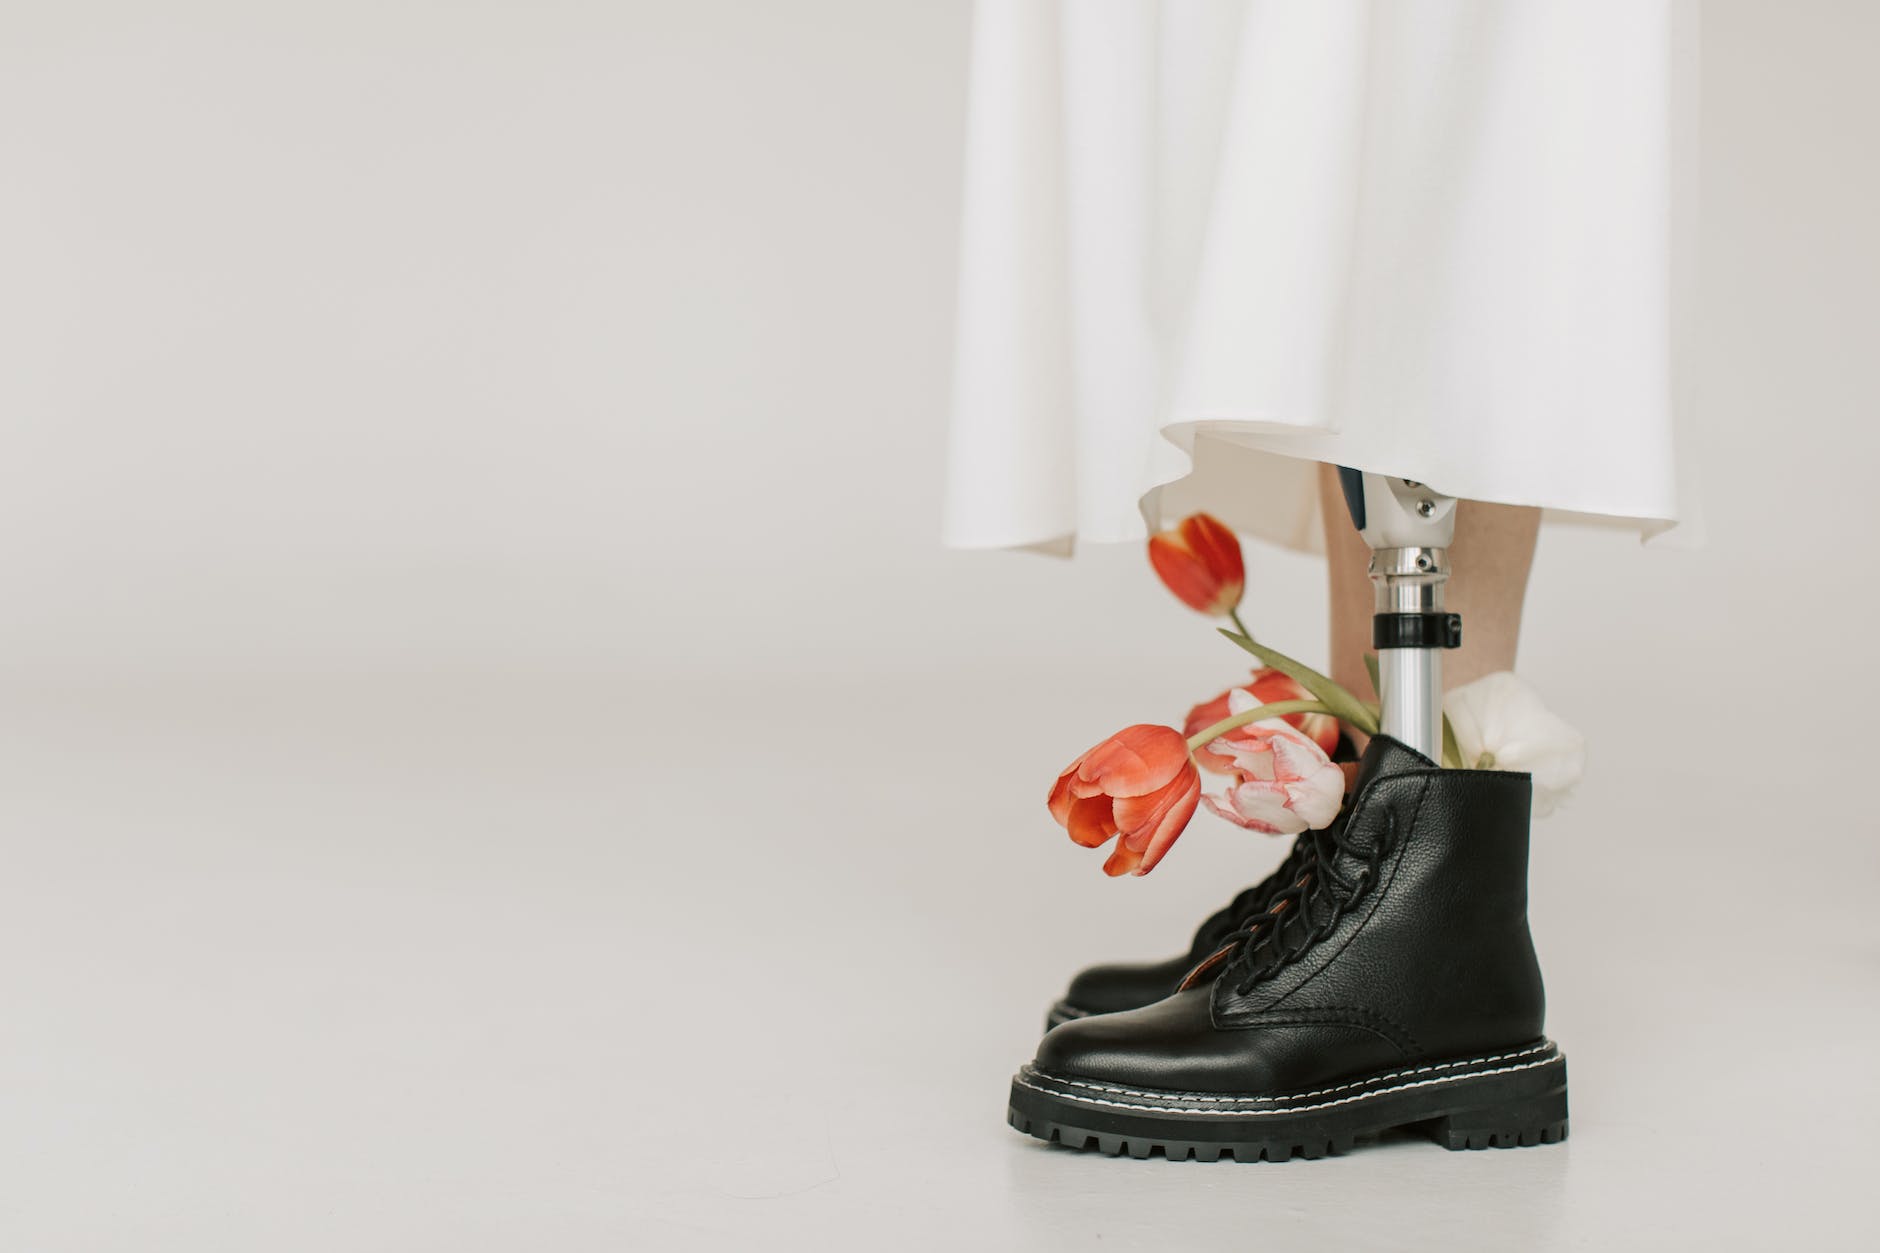 Photo of a pair of boots being worn by someone with one flesh foot and one prosthetic foot. There are tulips in the boot with the prosthetic foot to show the beauty of diversity.